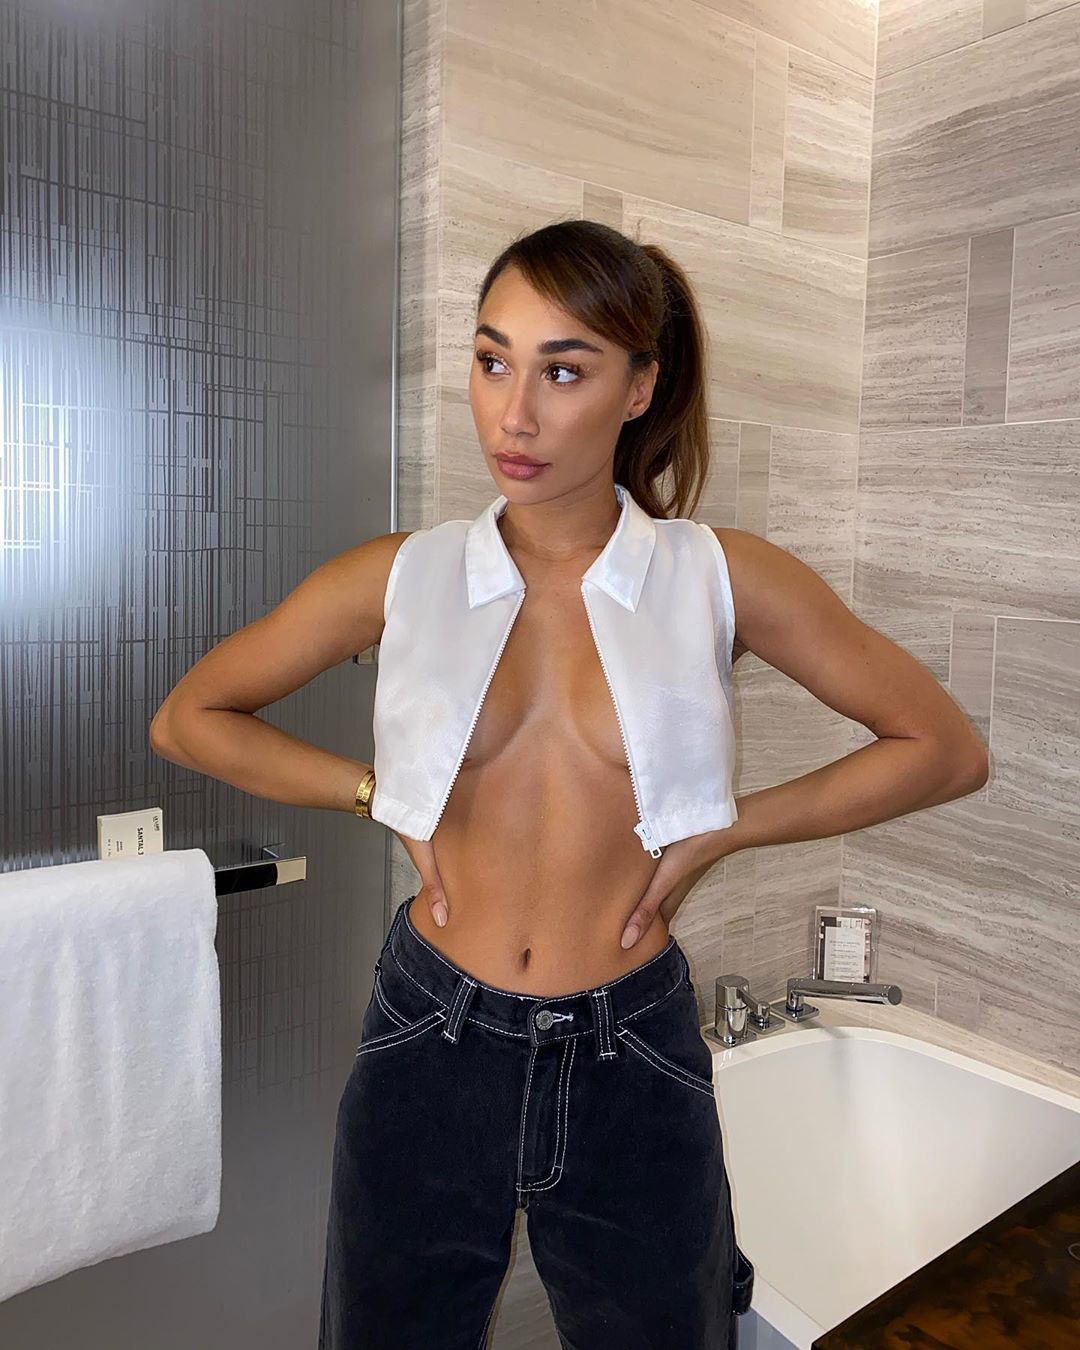 Eva Gutowski body muscle, Hot Model Picture, costumes designs